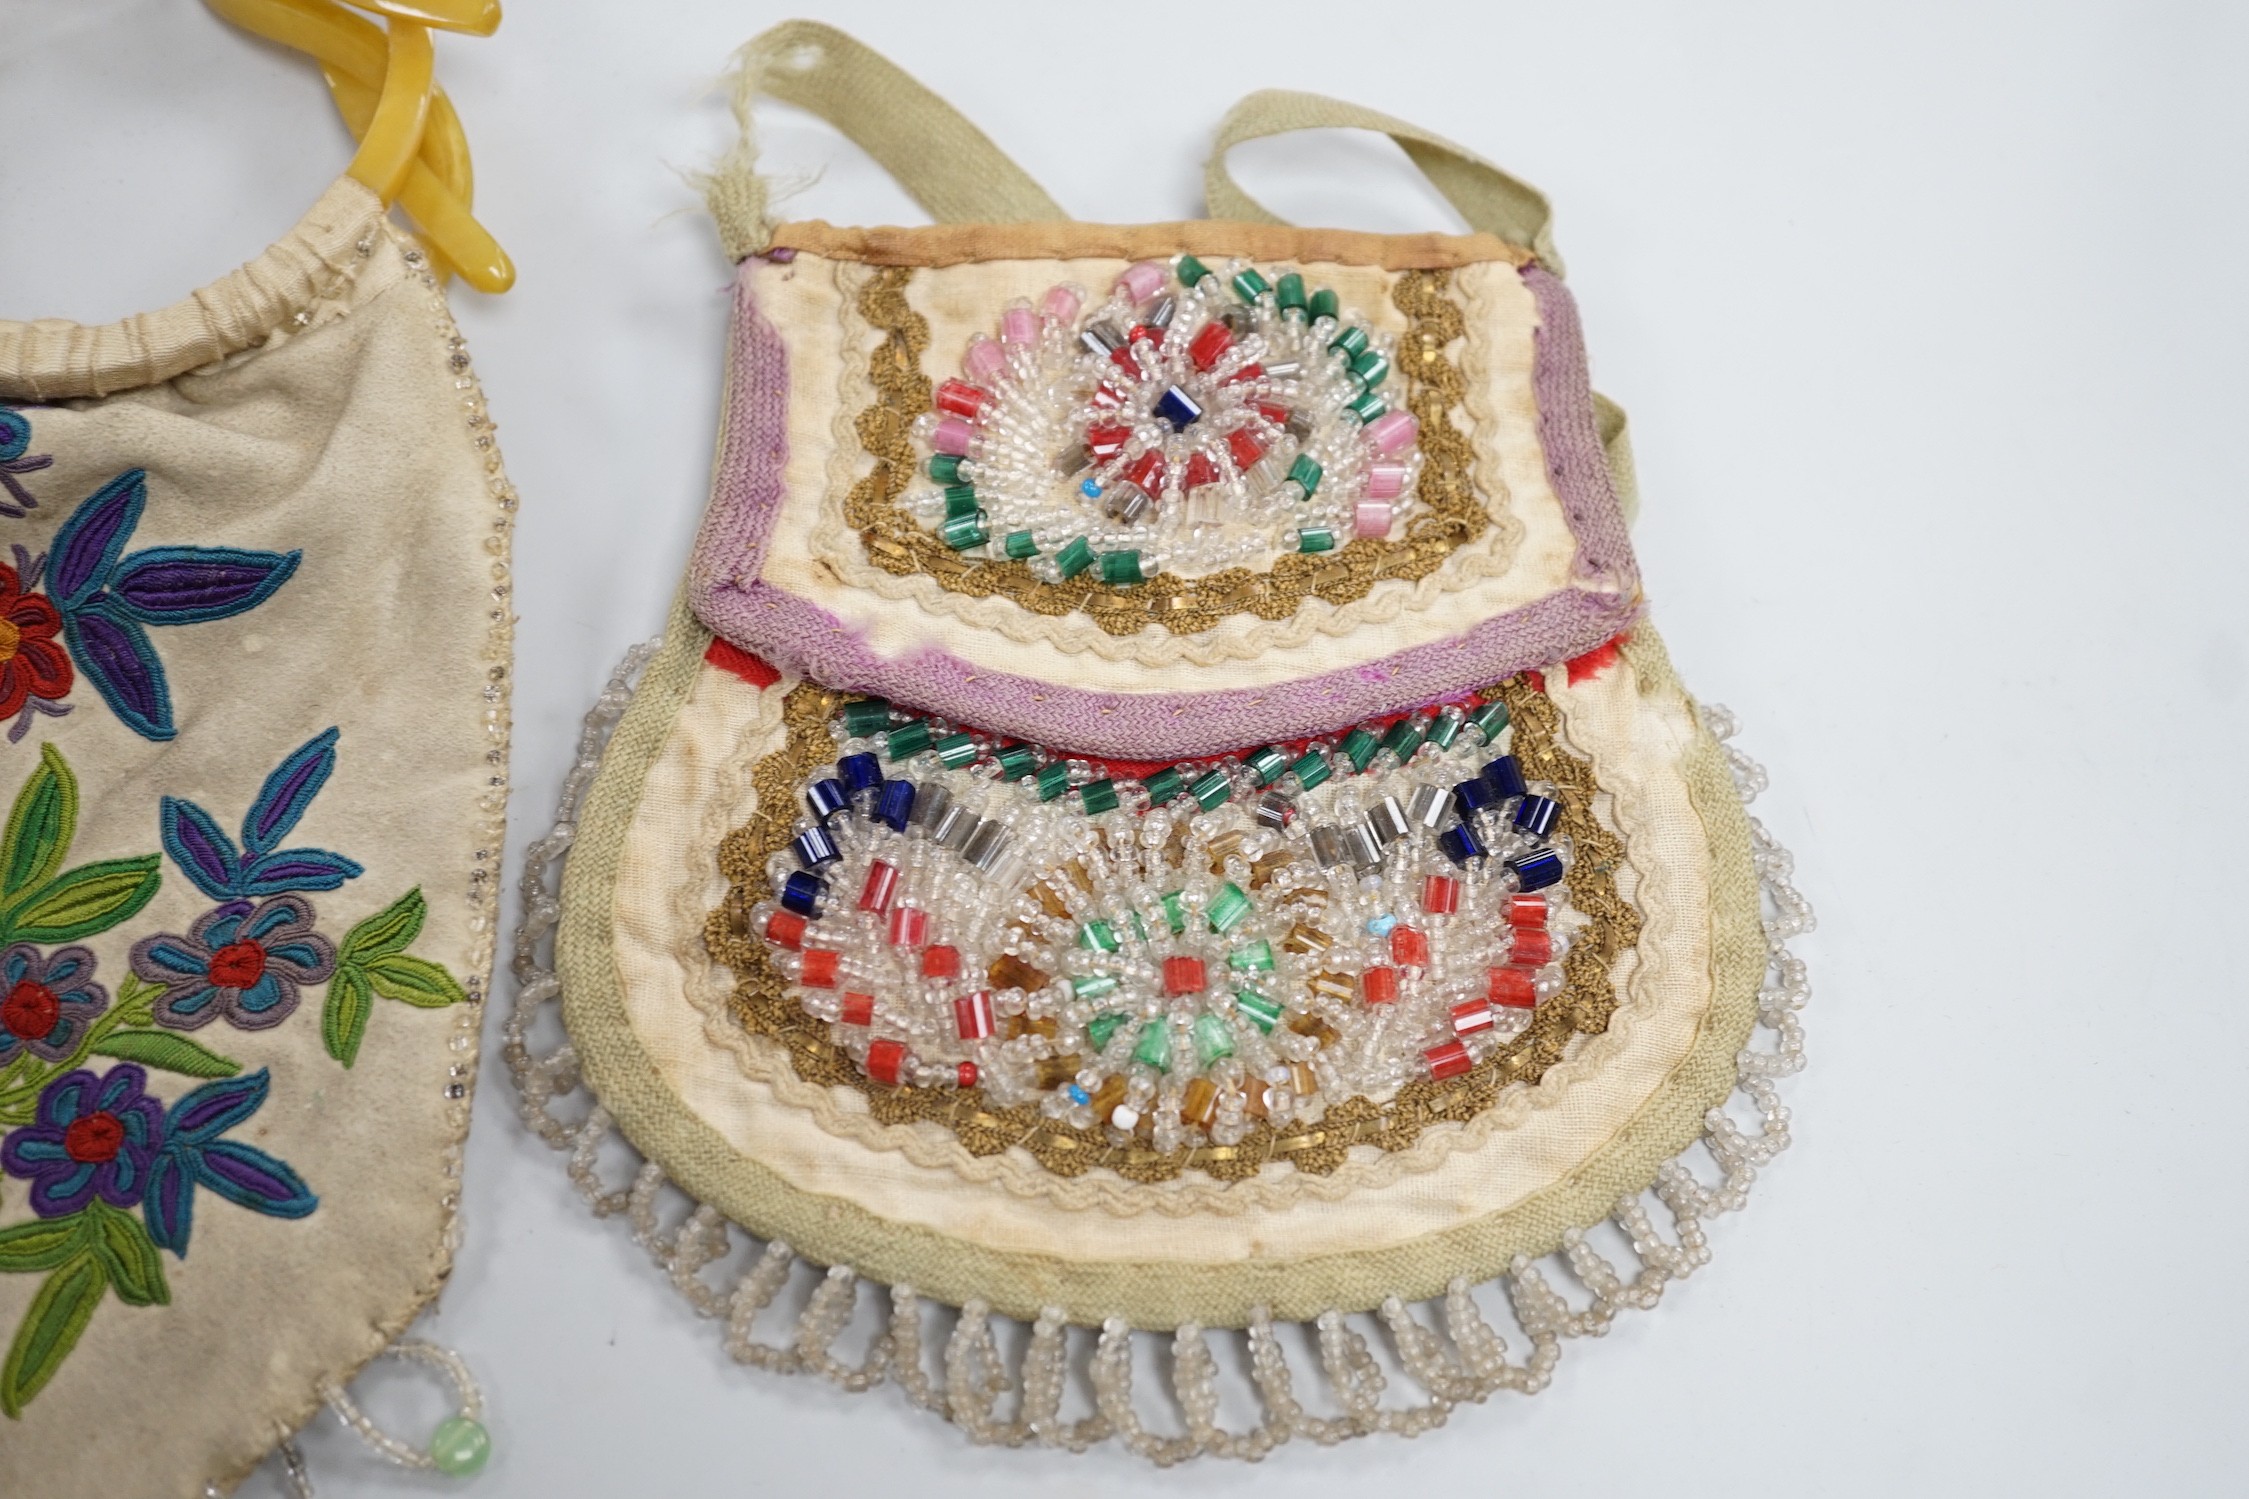 A mid to late 19th century Iroquois, North American/Canadian Indian glass beadwork bag on linen, together with a smaller red wool beaded purse and a 20th century suede embroidered bag with beaded fringe